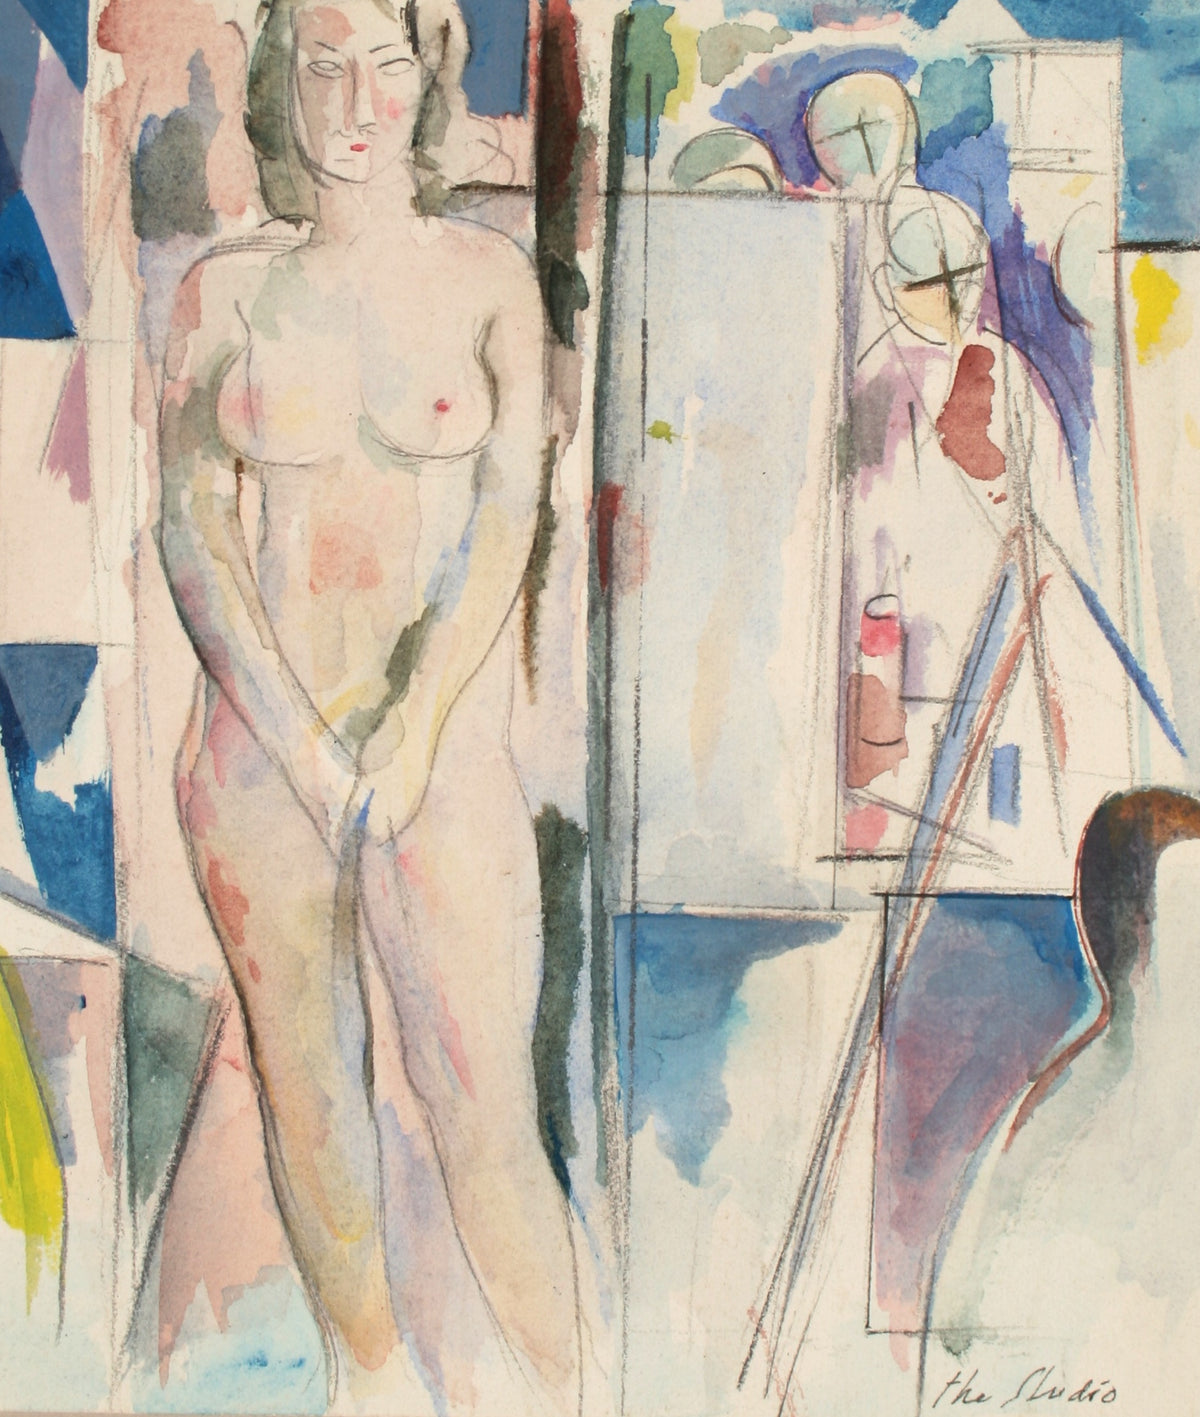 &lt;i&gt;The Studio&lt;/i&gt; &lt;br&gt;Late 20th Century Watercolor and Graphite &lt;br&gt;&lt;br&gt;#71541